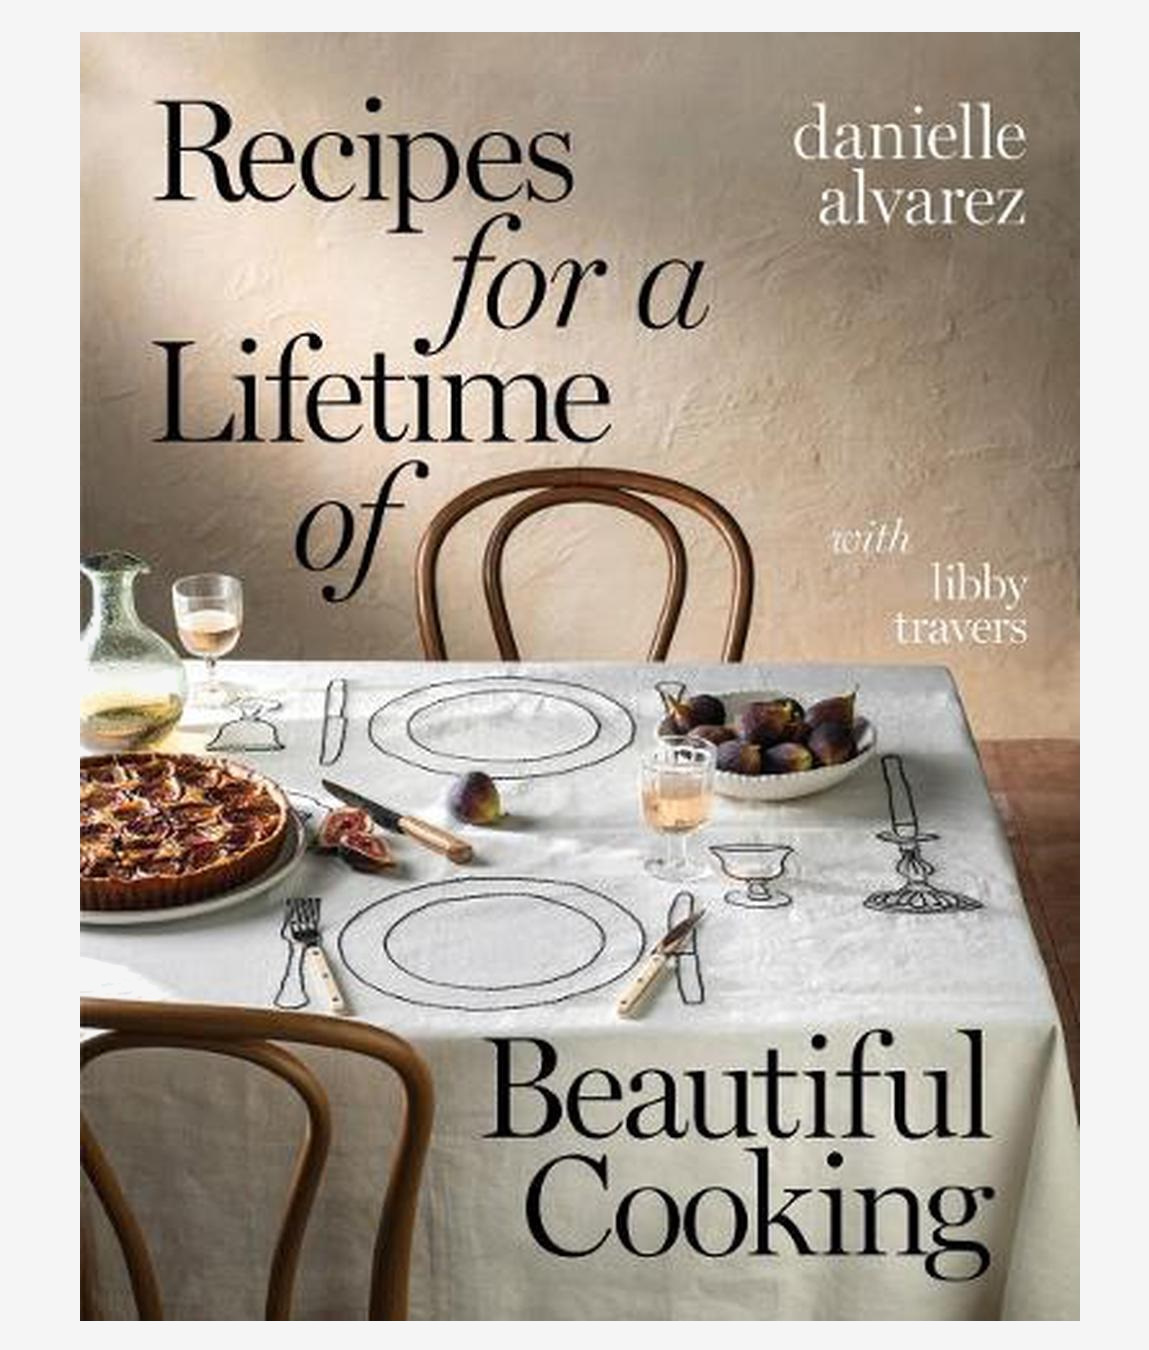 Book recipes for a lifetime of beautiful cooking